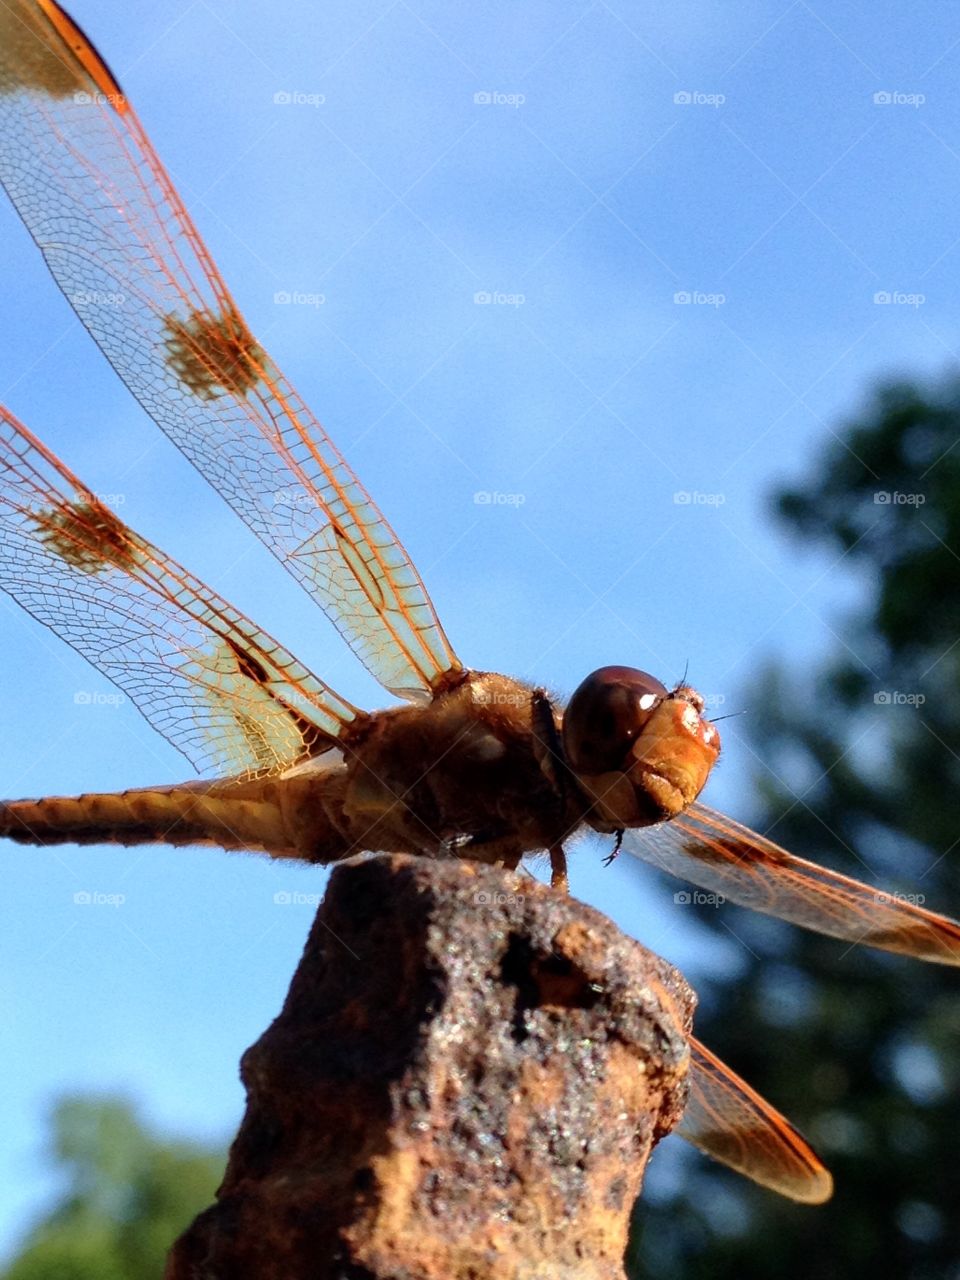 Dragonfly close up, blue sky with greenery background. Copper color & great details!